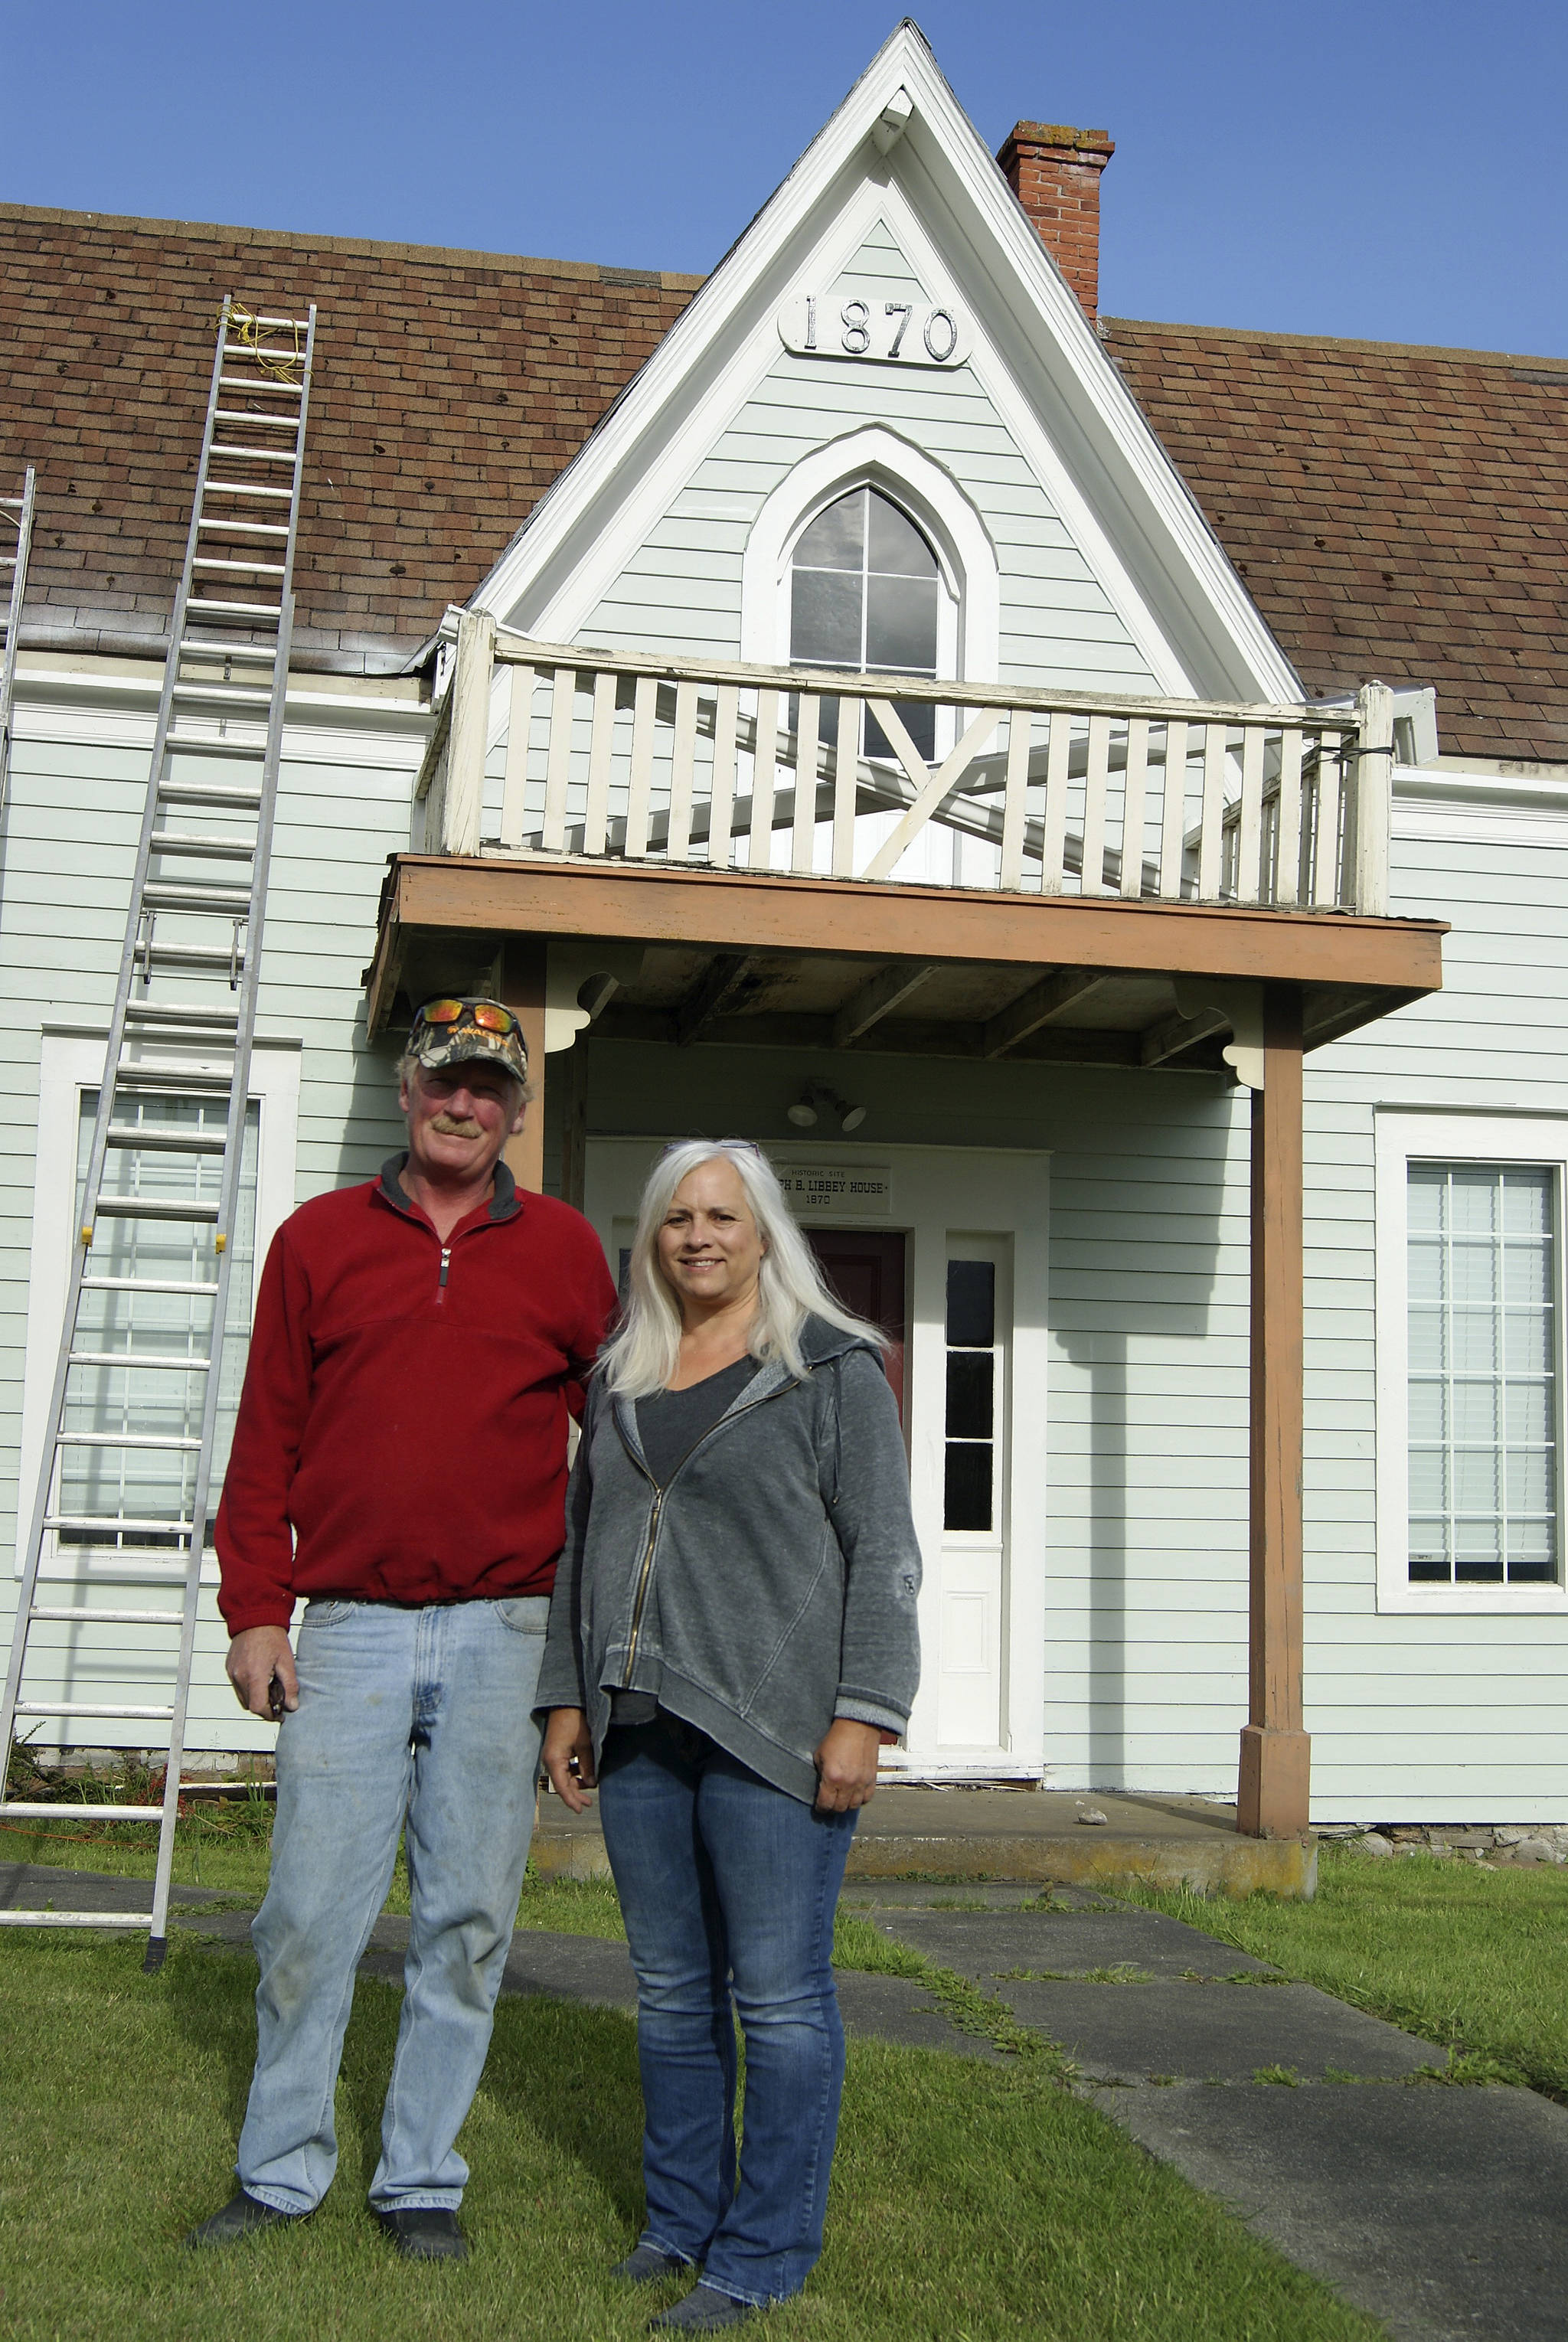 Photo by Maria Matson / Whidbey News Group                                Dennis McCaslin and Cindy Balthazar stand in front of the Joseph B. Libbey House, a historic structure built in 1870 that new owner McCaslin is working to restore.